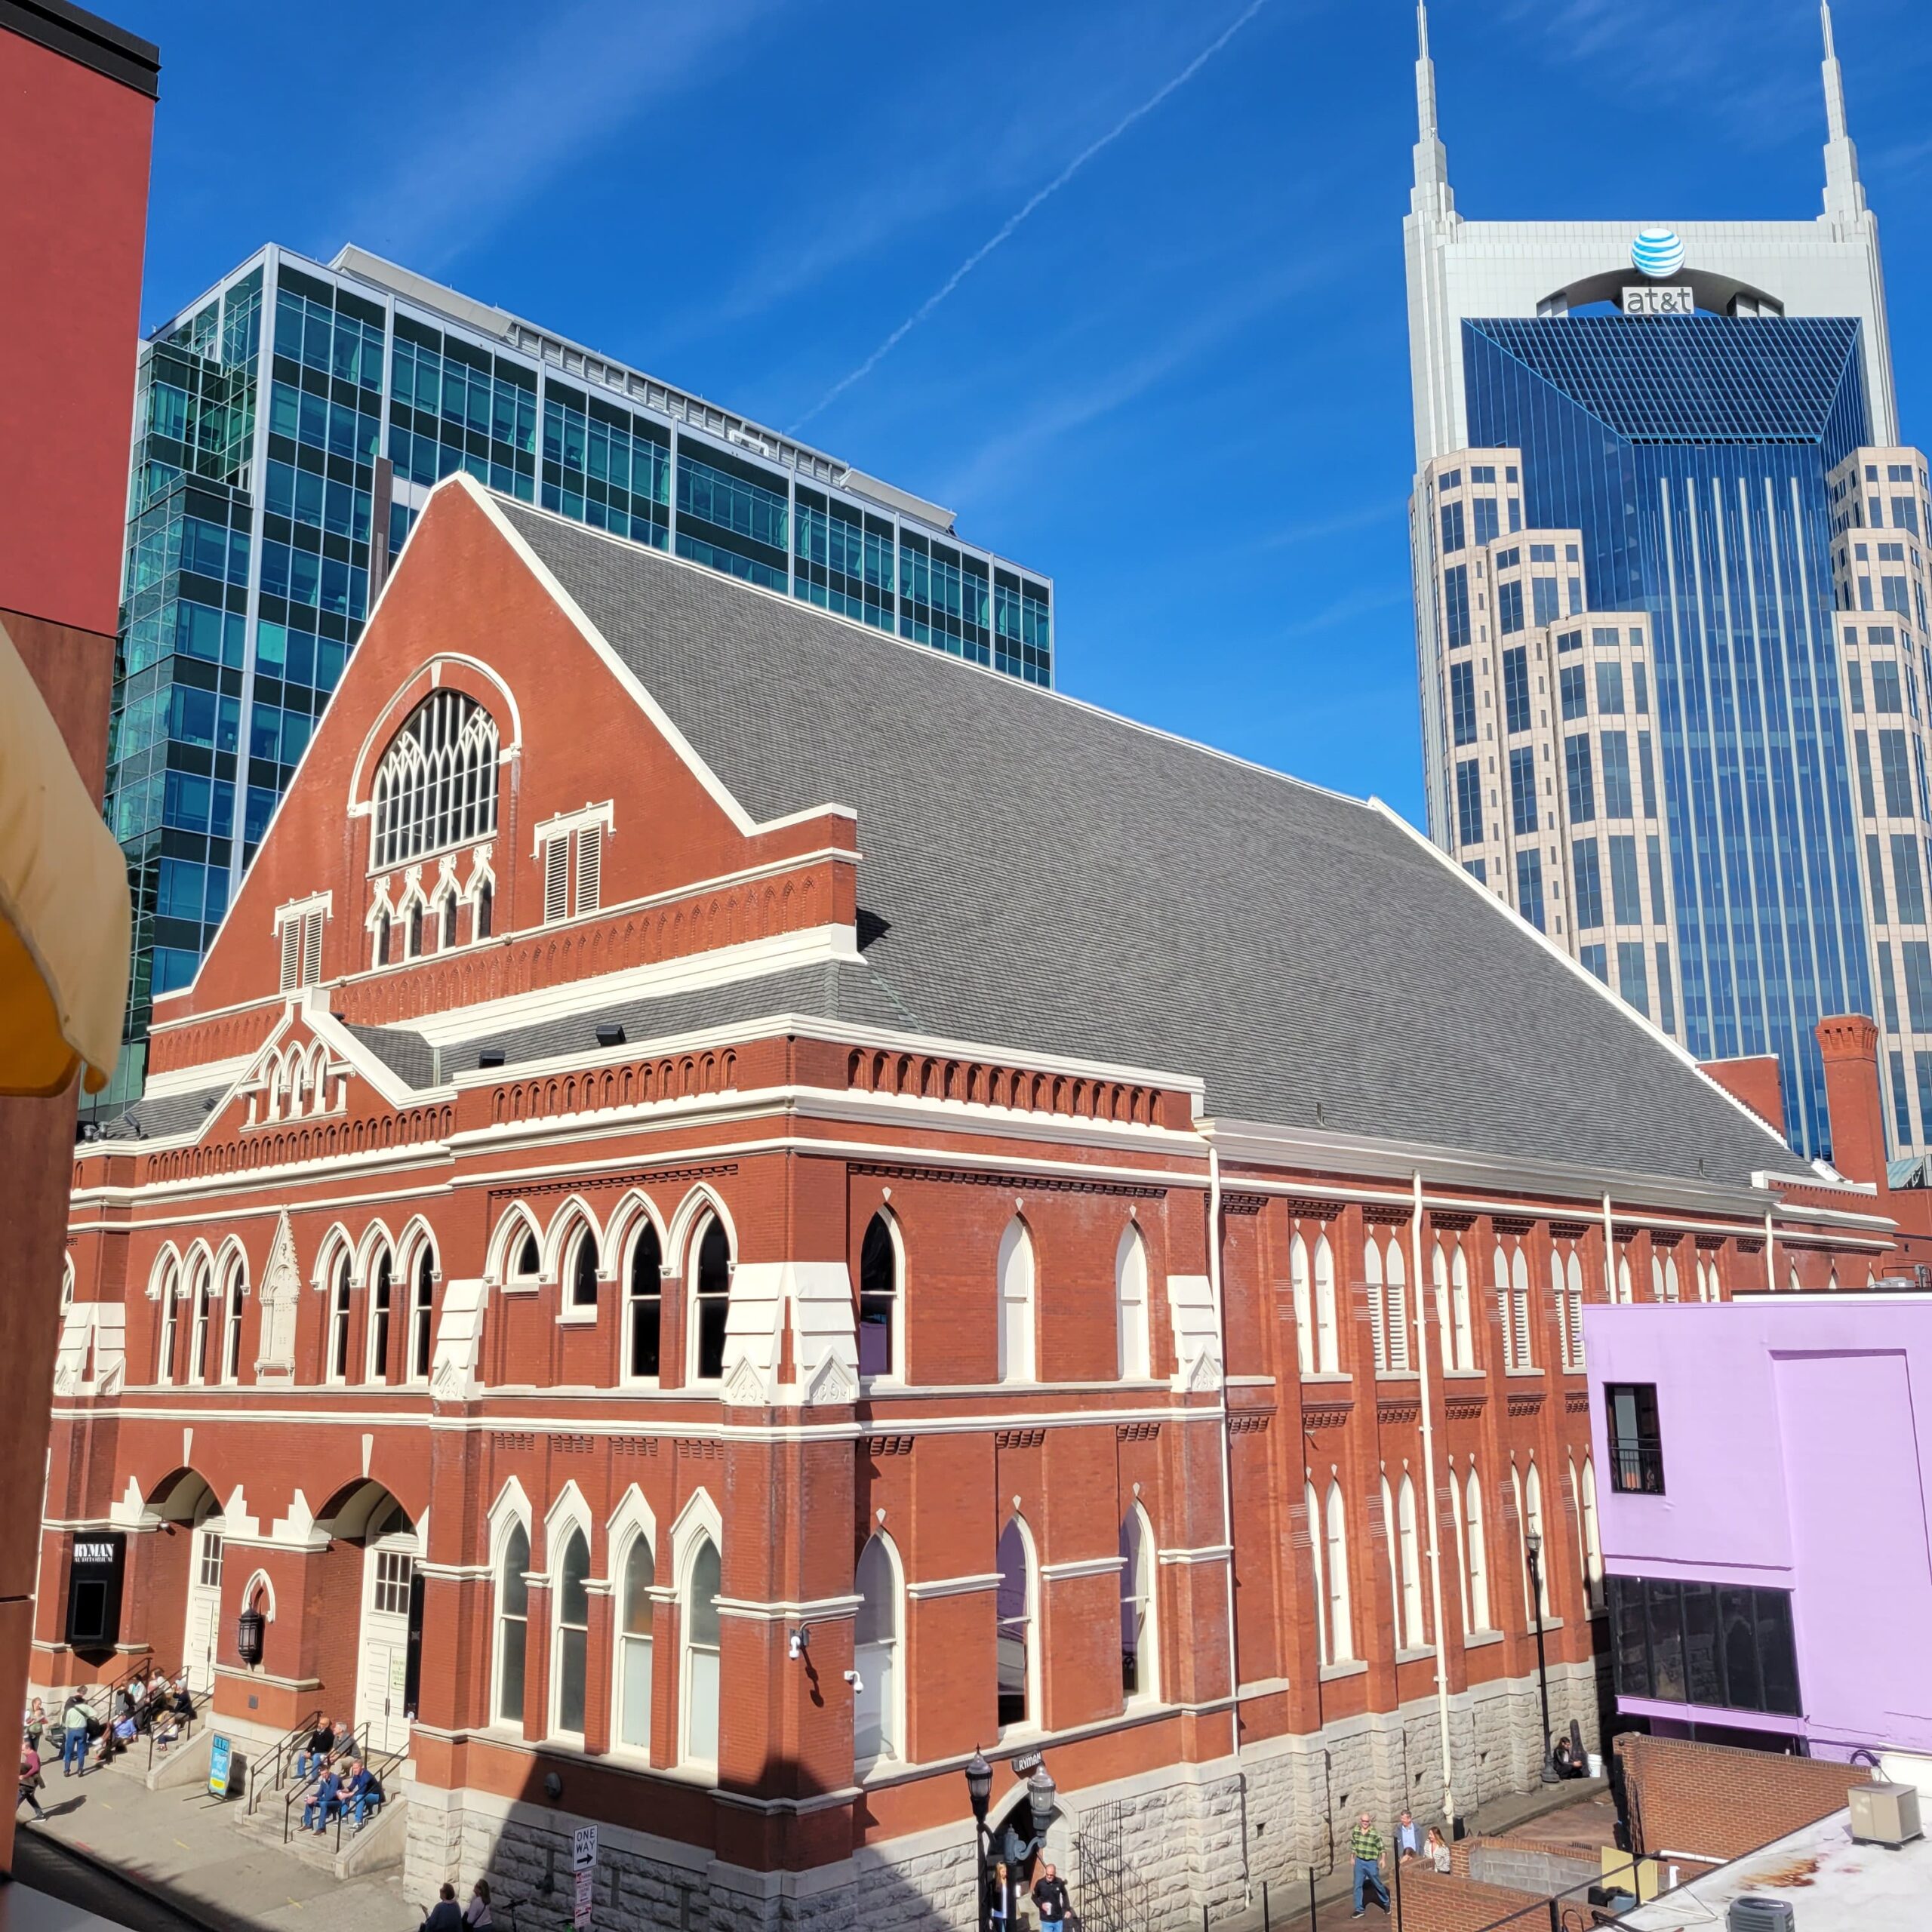 Ryman and the Bat Building during the daytime Nashville TN